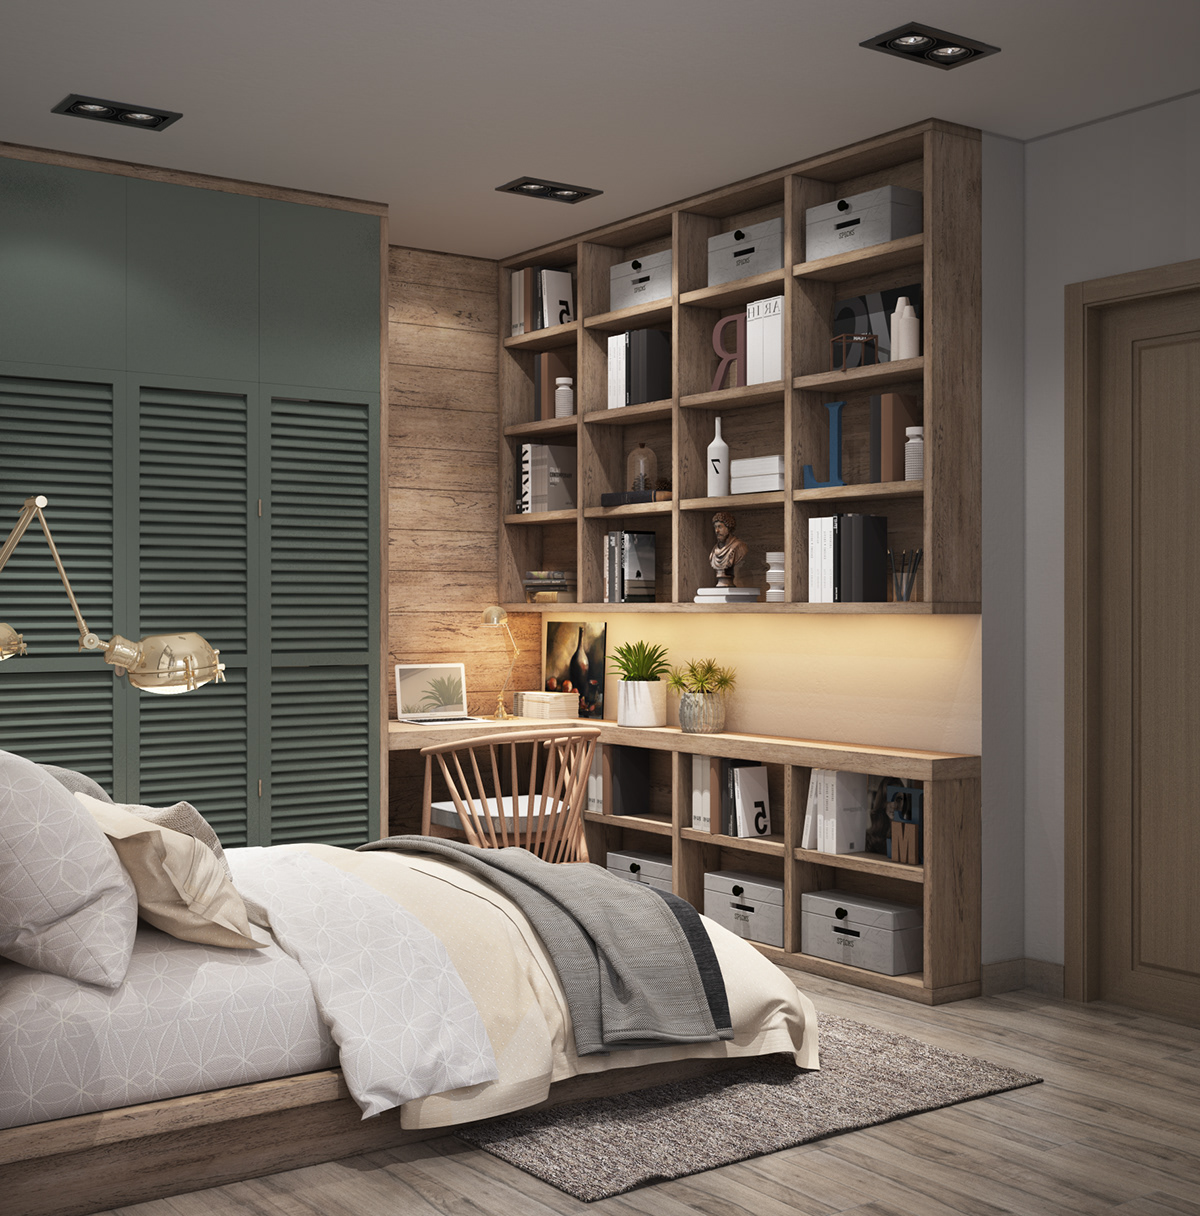 Use Multifunctional Furniture in the Bedroom